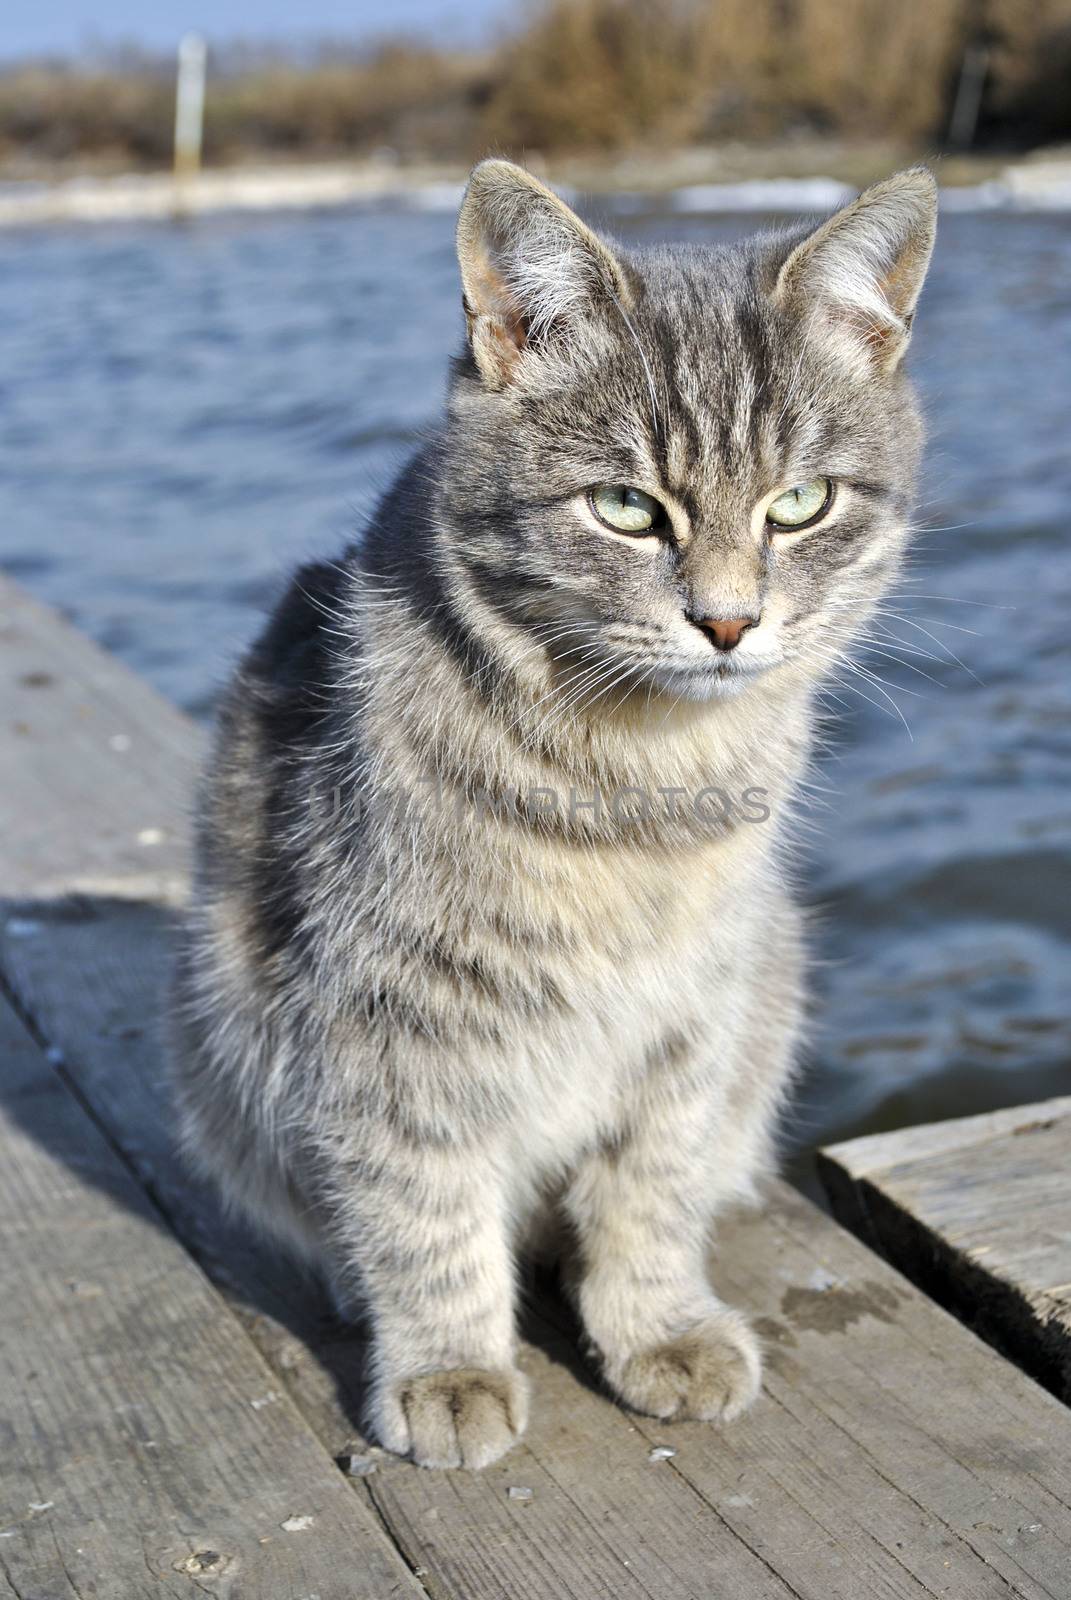 The gray cat on the background of the pond. The cat sits on a wooden pier on a background of water.